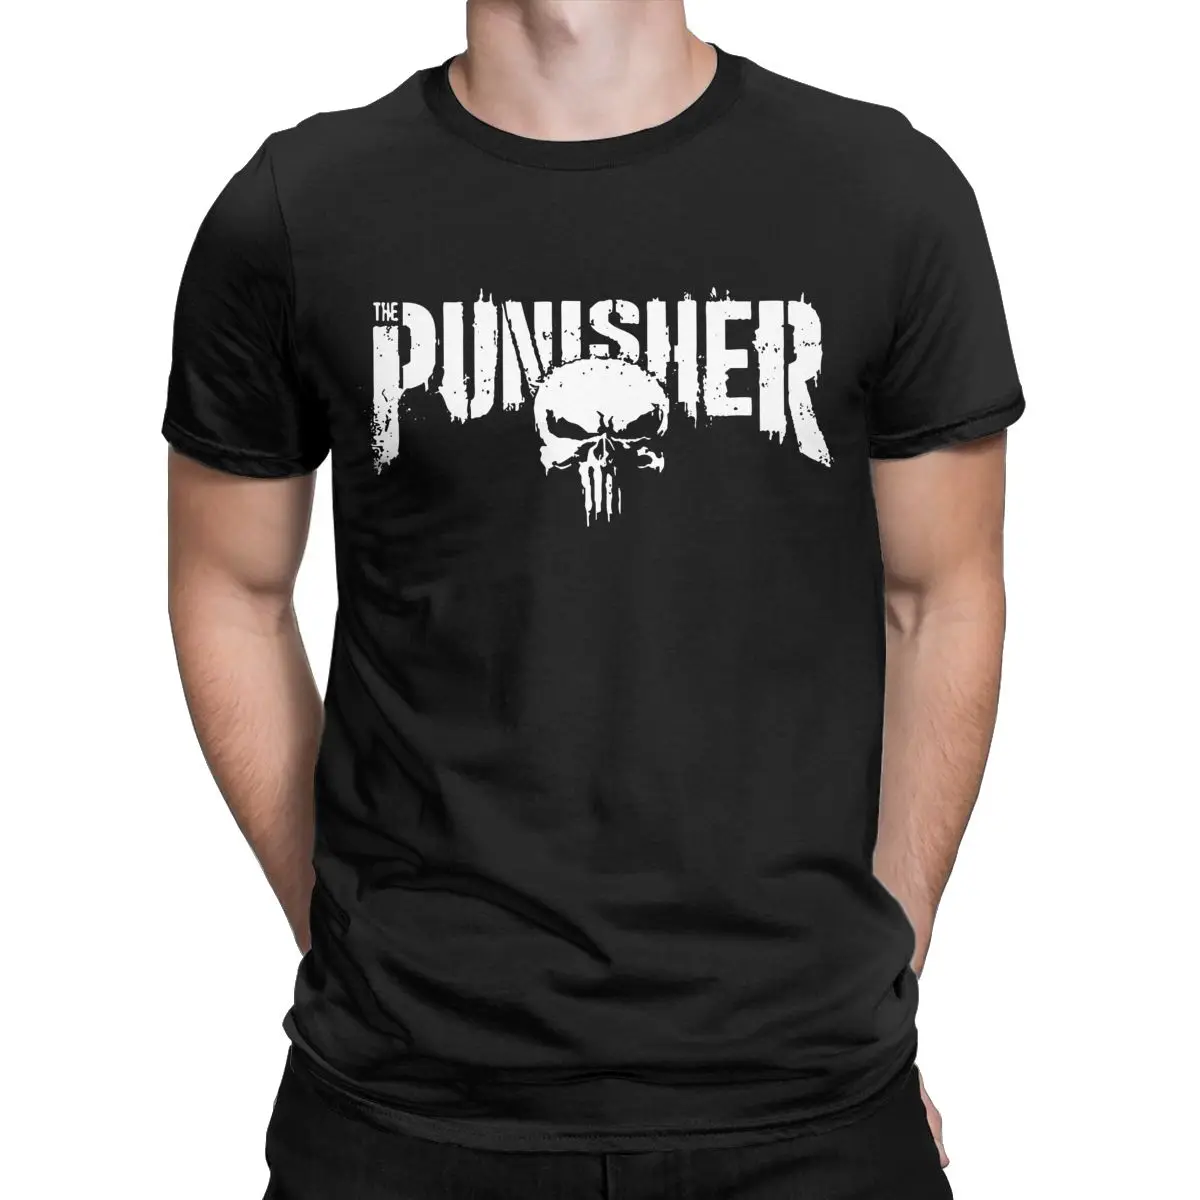 

Disney Marvel The Punisher Skull T Shirt for Men 100% Cotton Vintage T-Shirts Crew Neck Tee Shirt Short Sleeve Clothes New